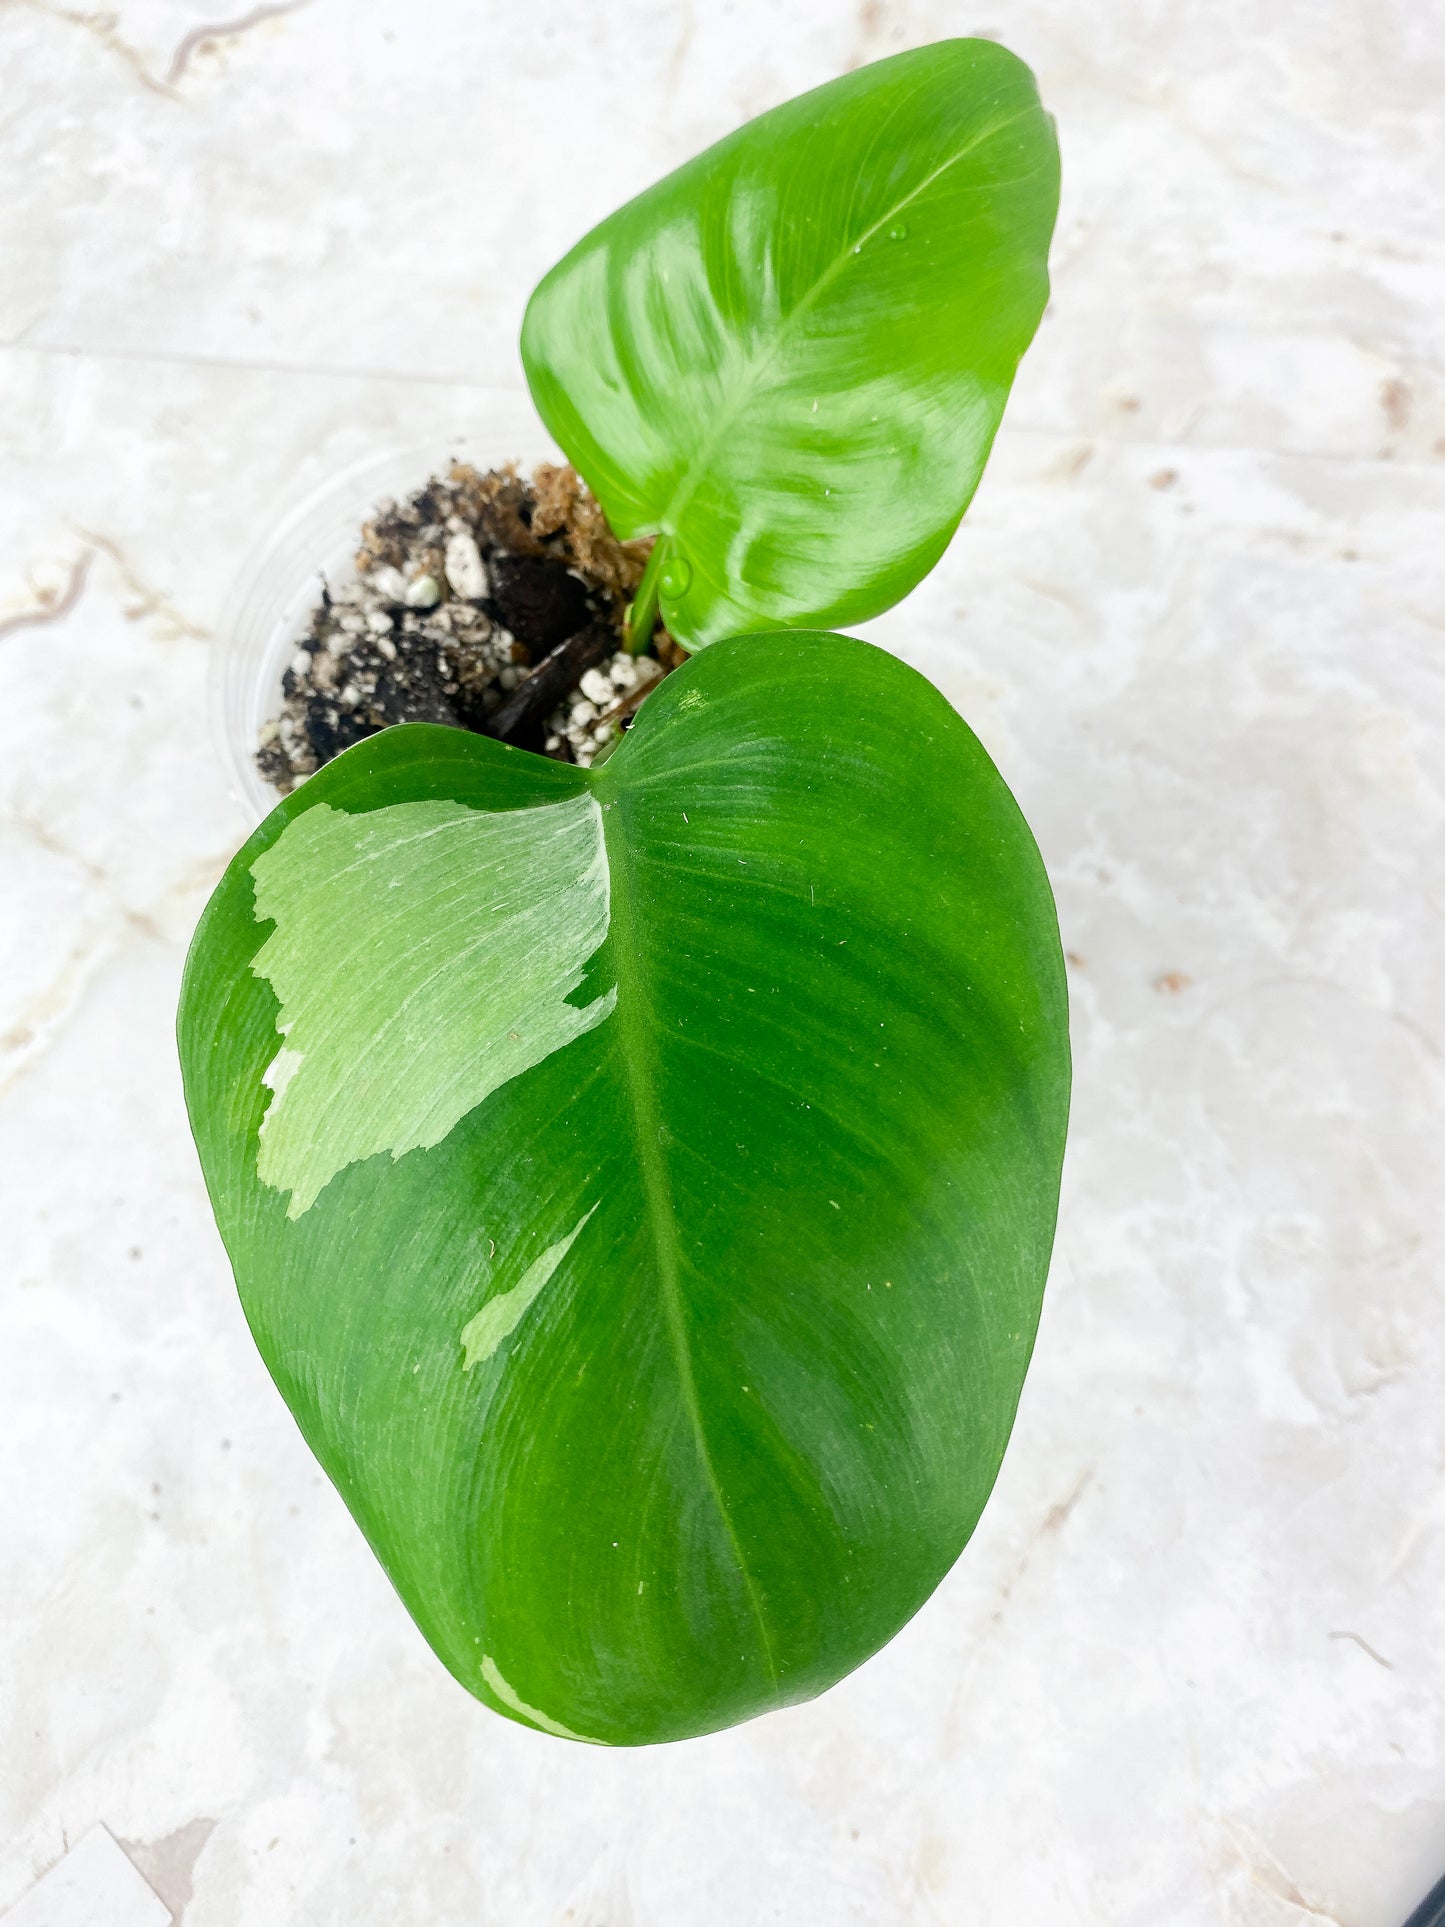 Philodendron White Princess Rooting 2 leaves top cutting. 1 sprout